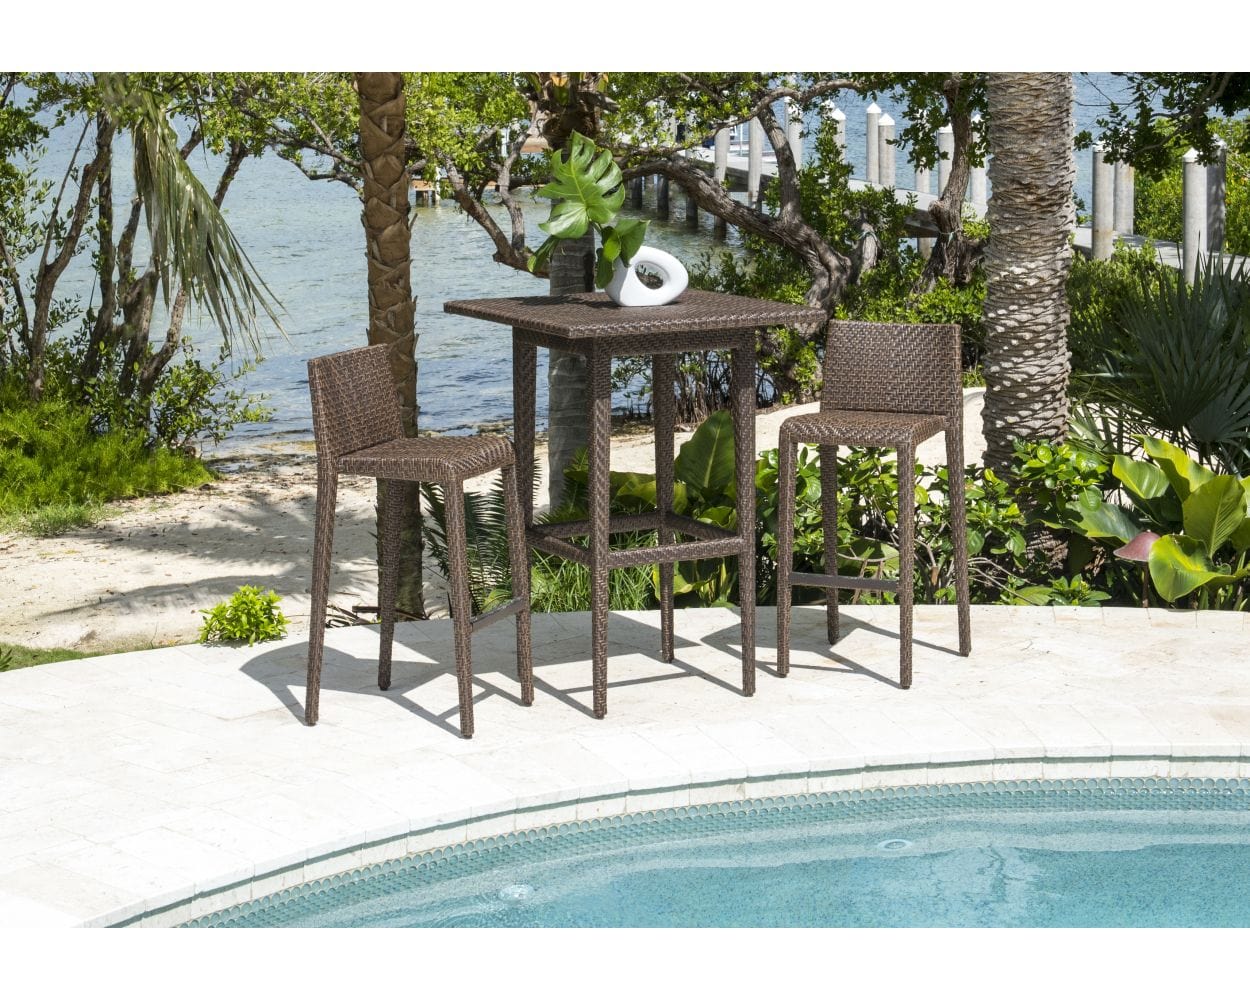 Dreamline Outdoor Bar Sets/Garden Patio Bar Sets (2 Chairs And Table Set)